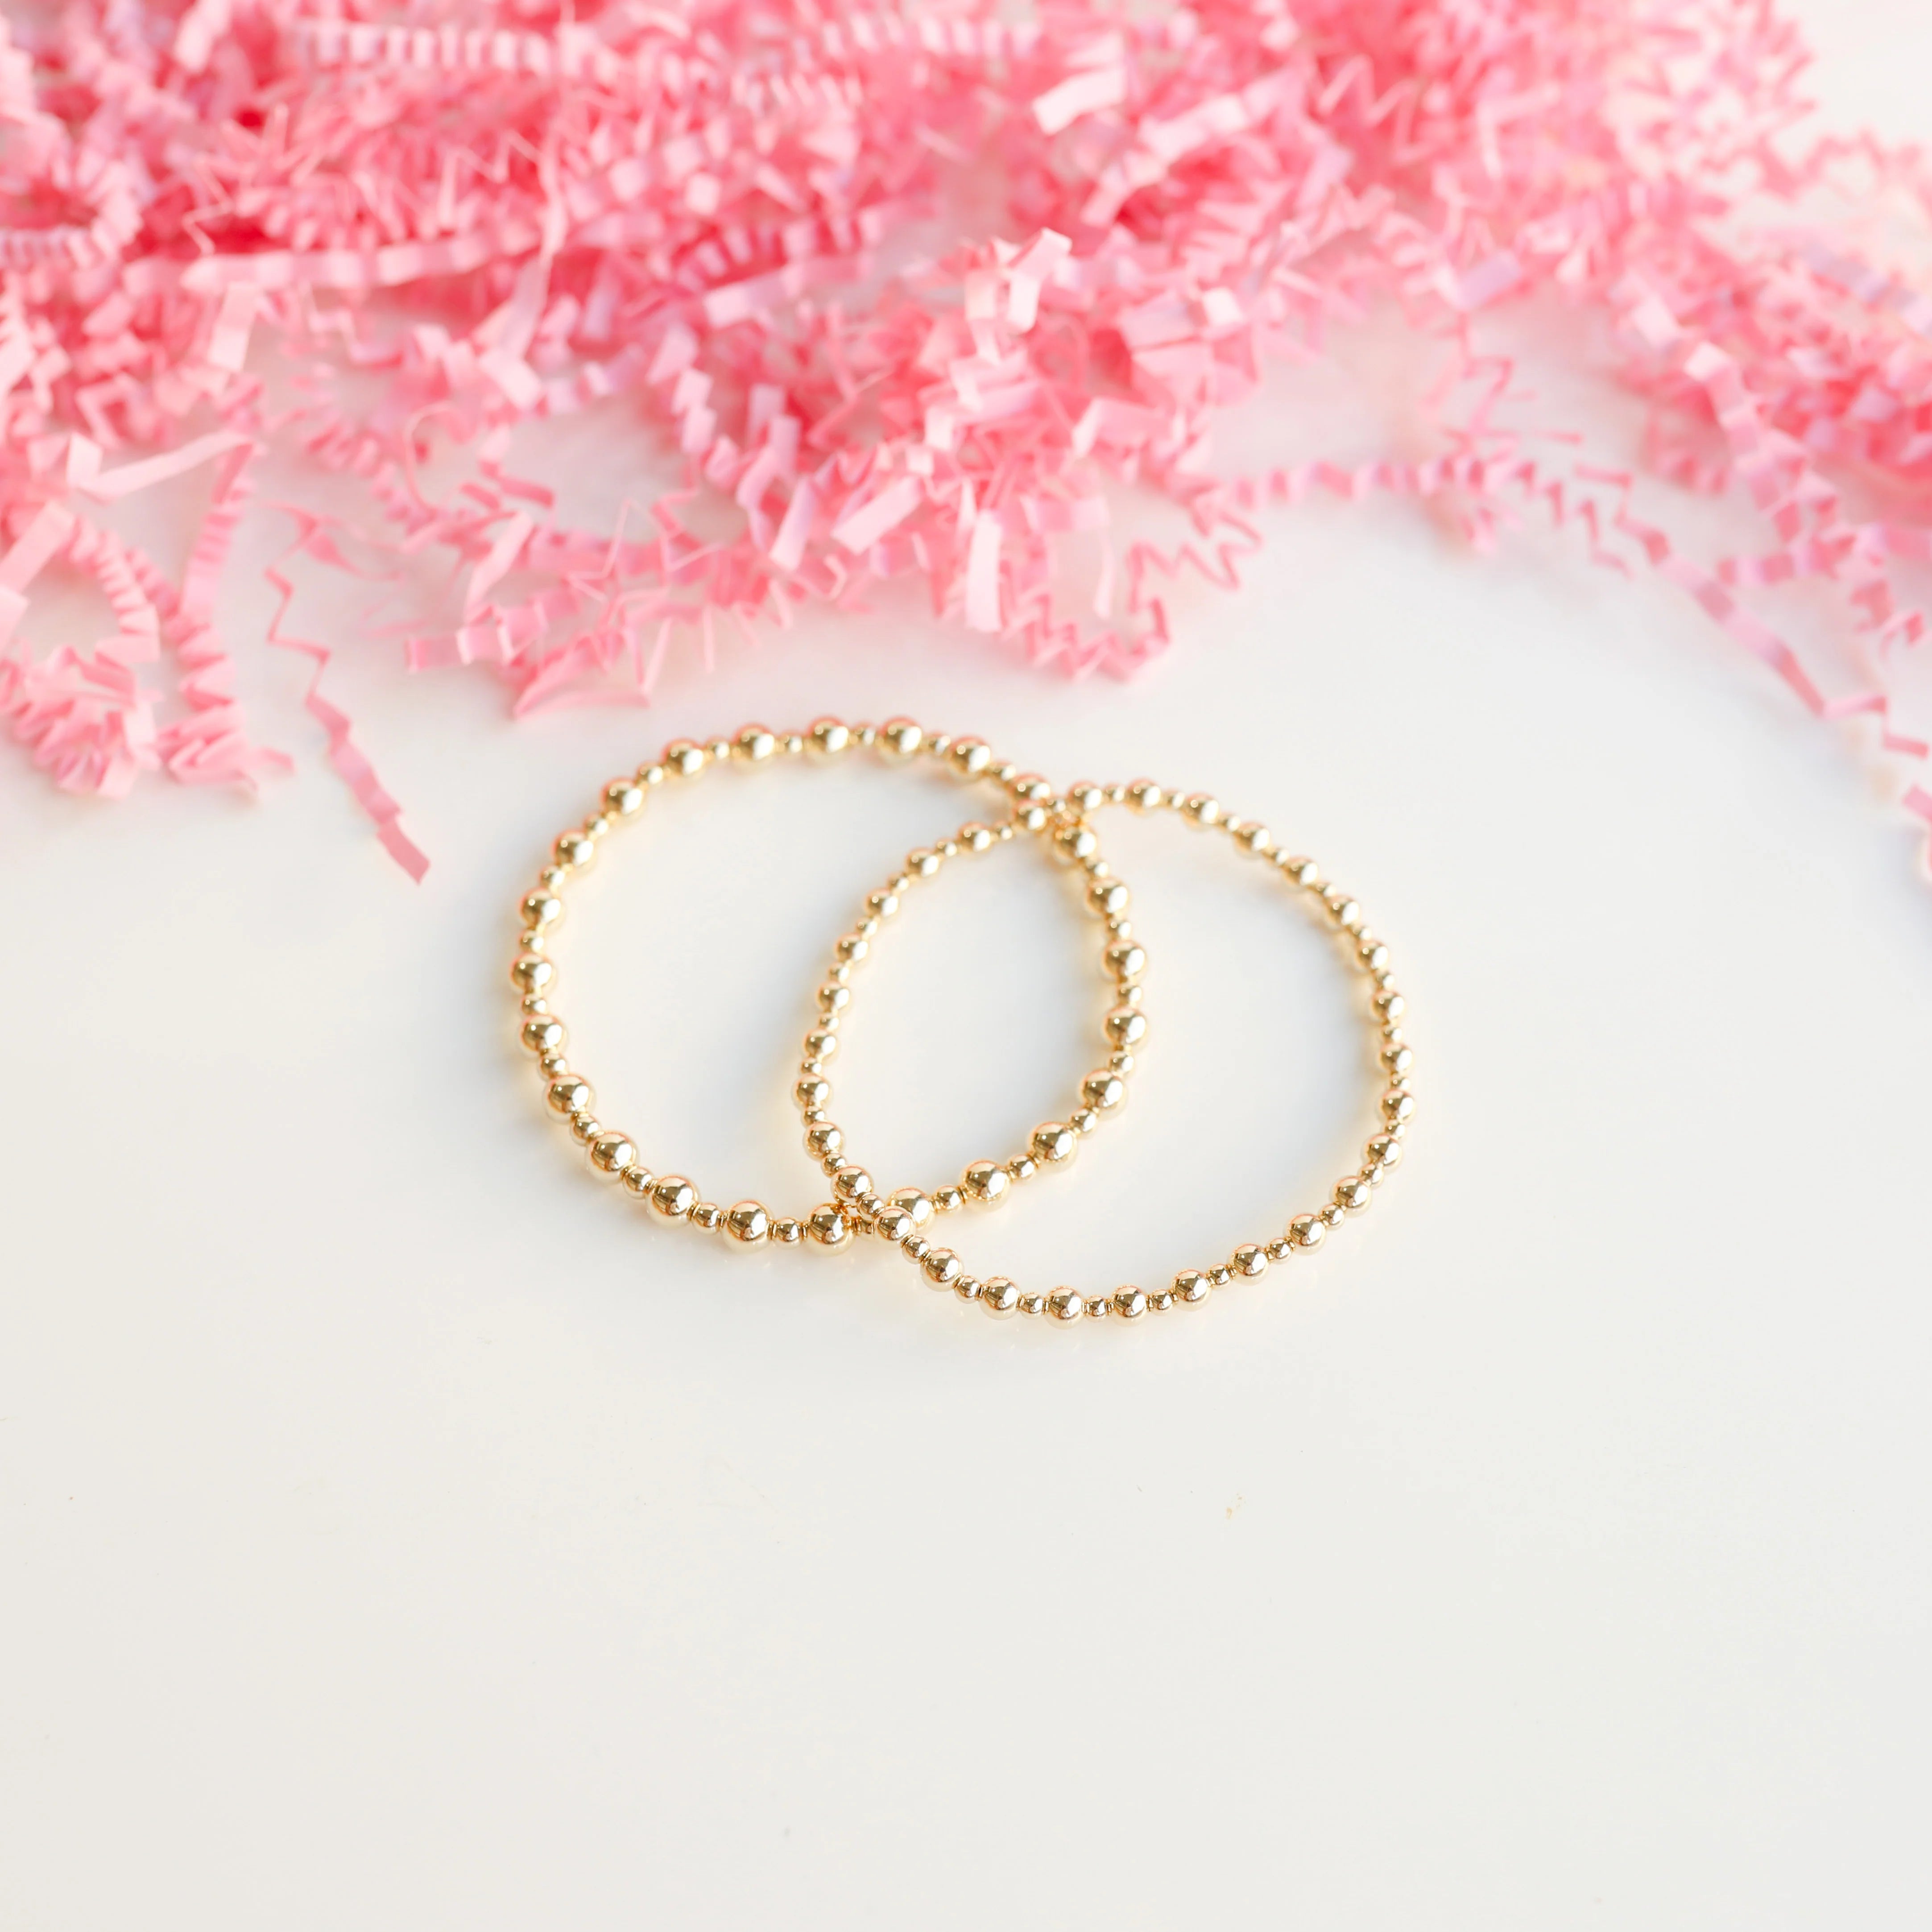 Beaded Blondes | Mini Katy Bracelet in Gold - Giddy Up Glamour Boutique